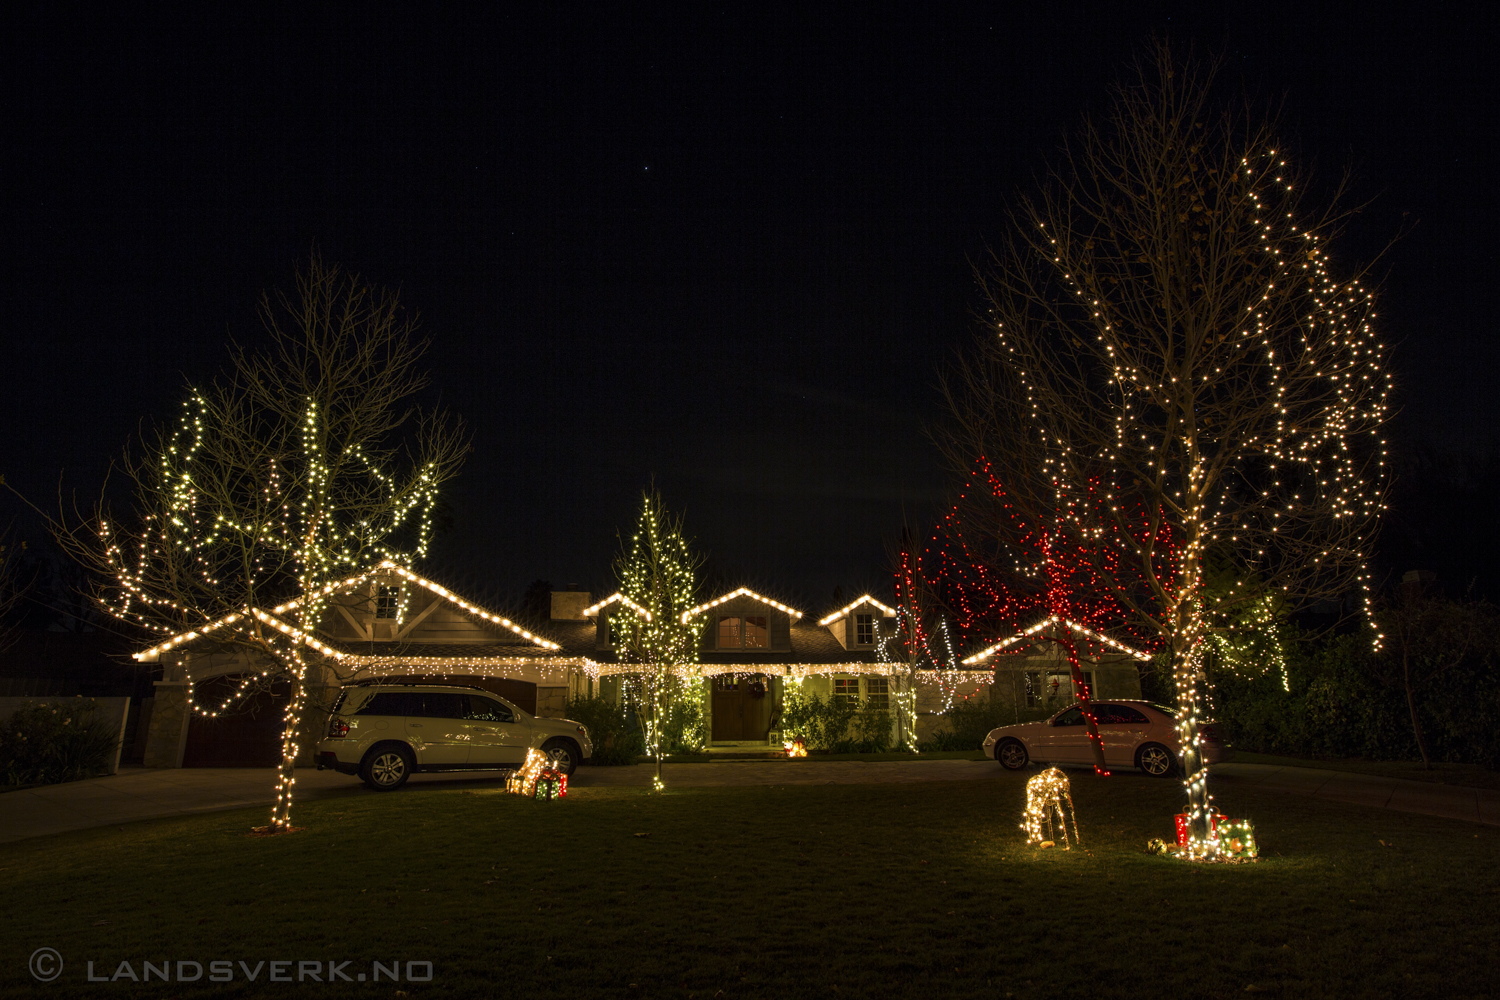 Pull yourselves together Candy Cane Lane, you haven't even filled up the trees properly! Woodland Hills, Los Angeles, California.

(Canon EOS 5D Mark III / Canon EF 16-35mm f/2.8 L II USM)